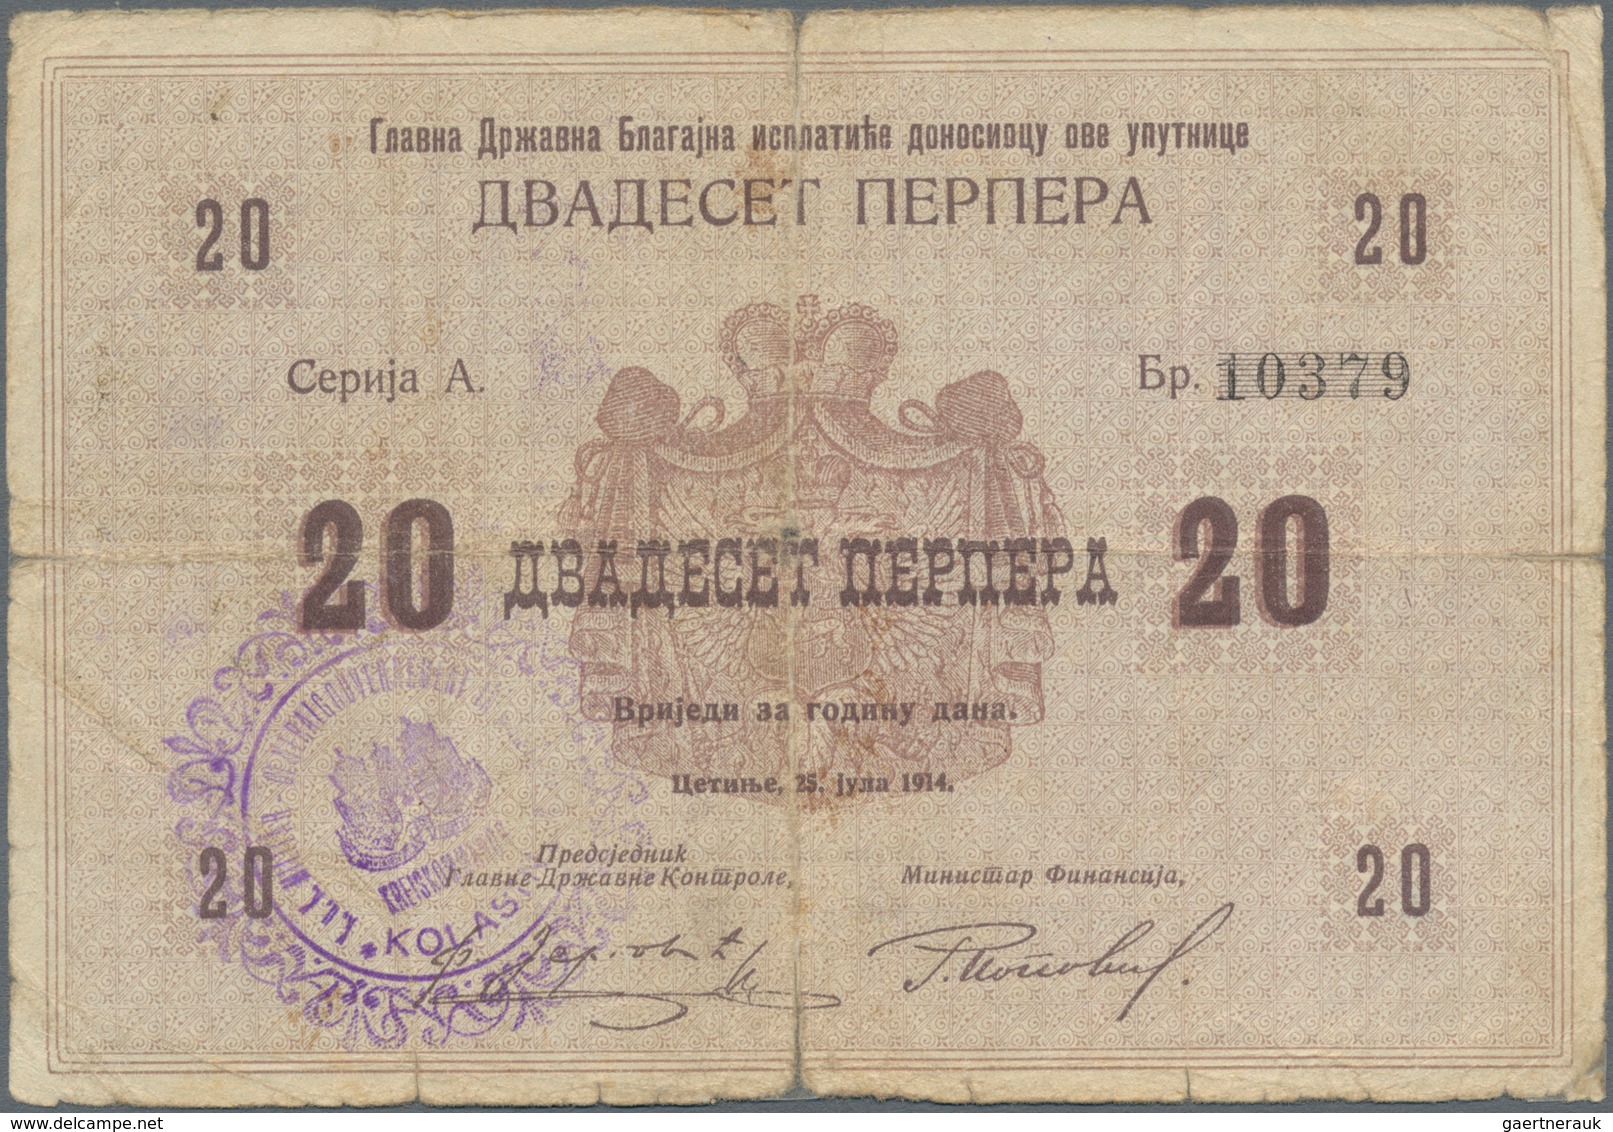 Montenegro: Military Government District Command set with 6 banknotes comprising 10 Perpera 1914 (19